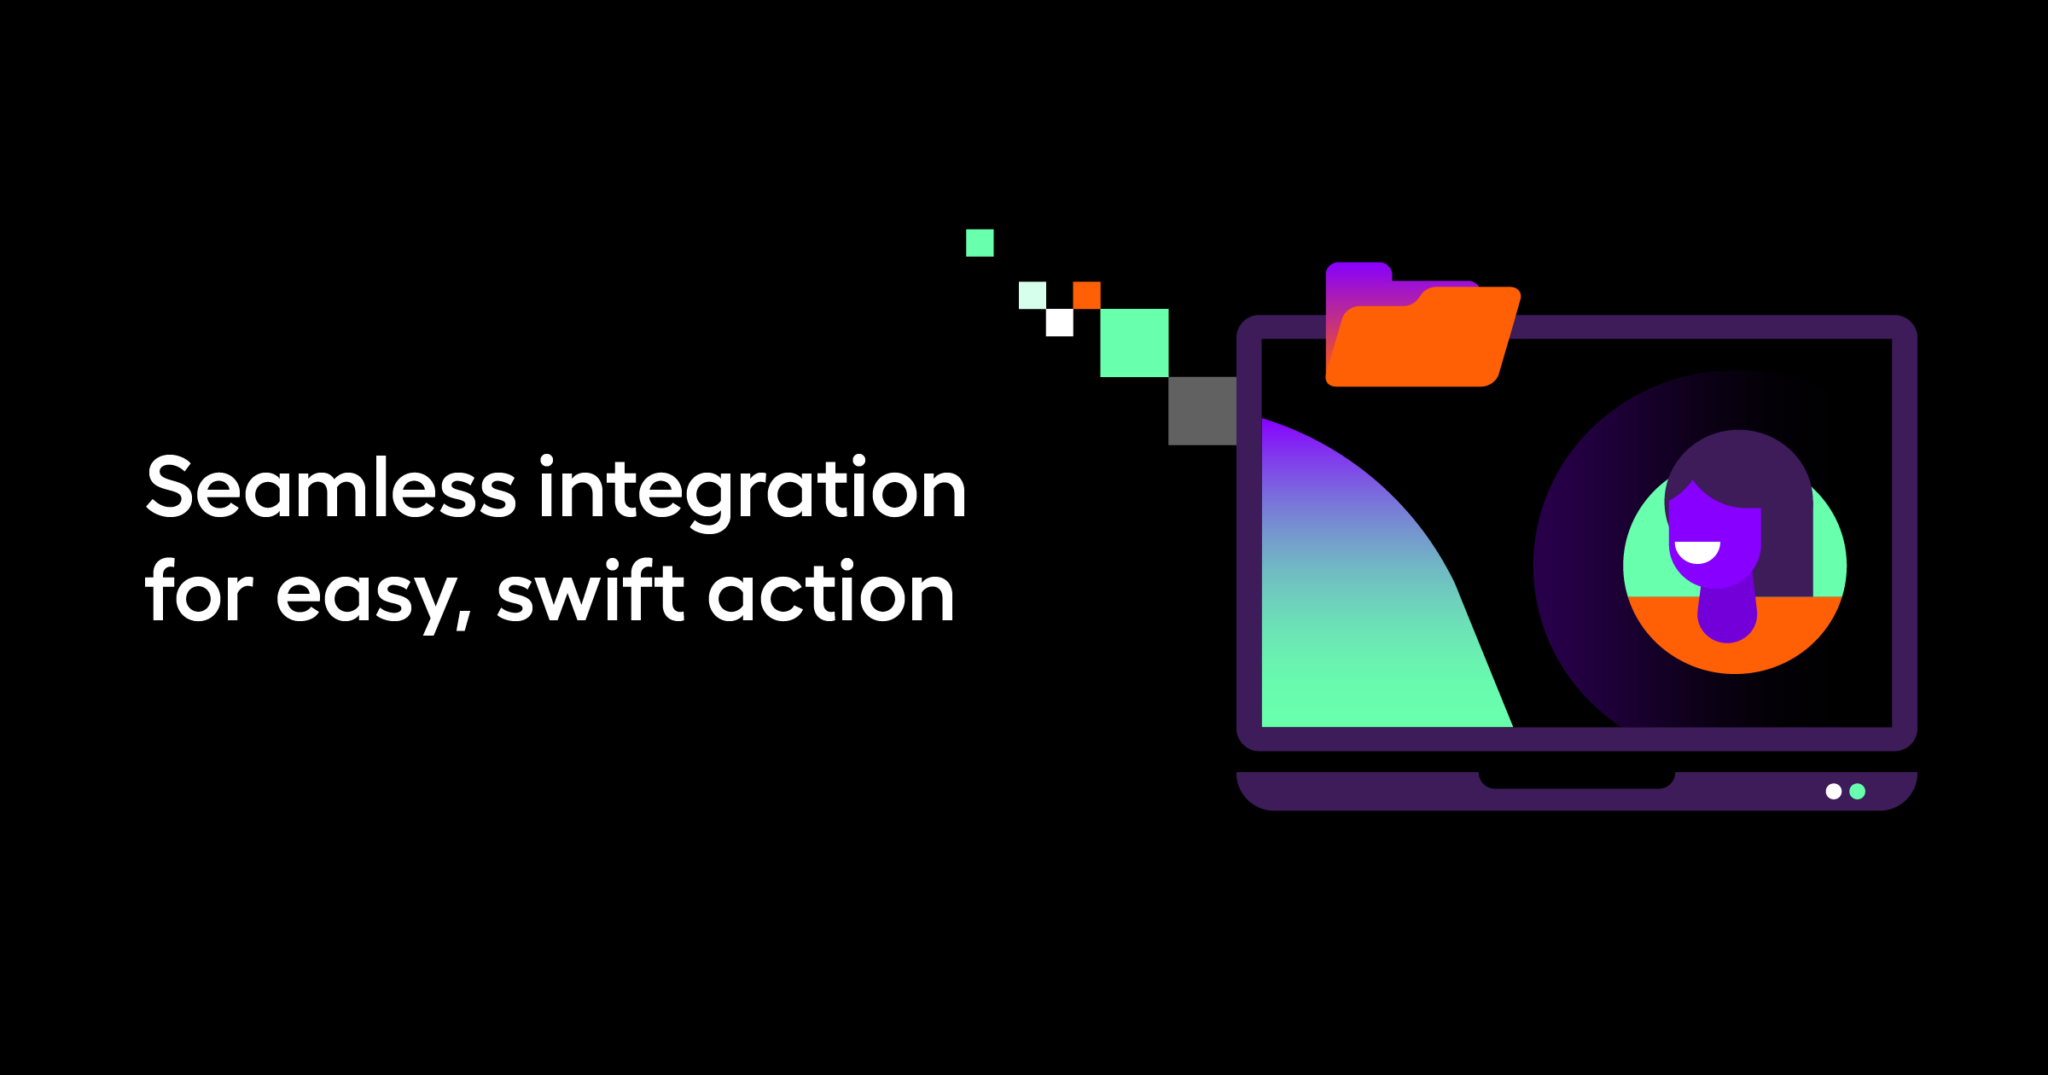 Seamless integration for easy, swift action